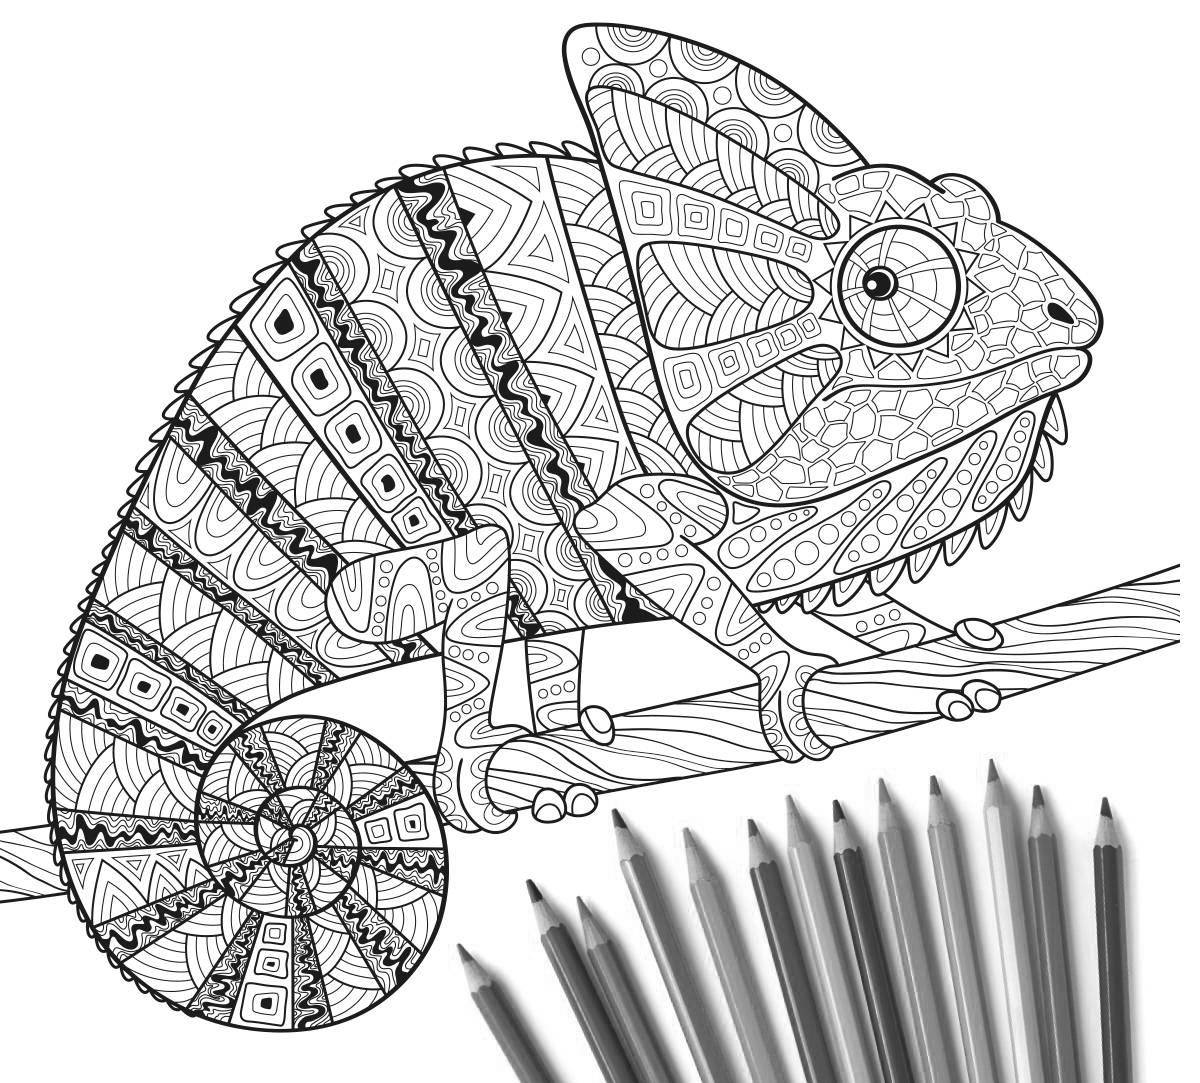 Magic chameleon coloring page